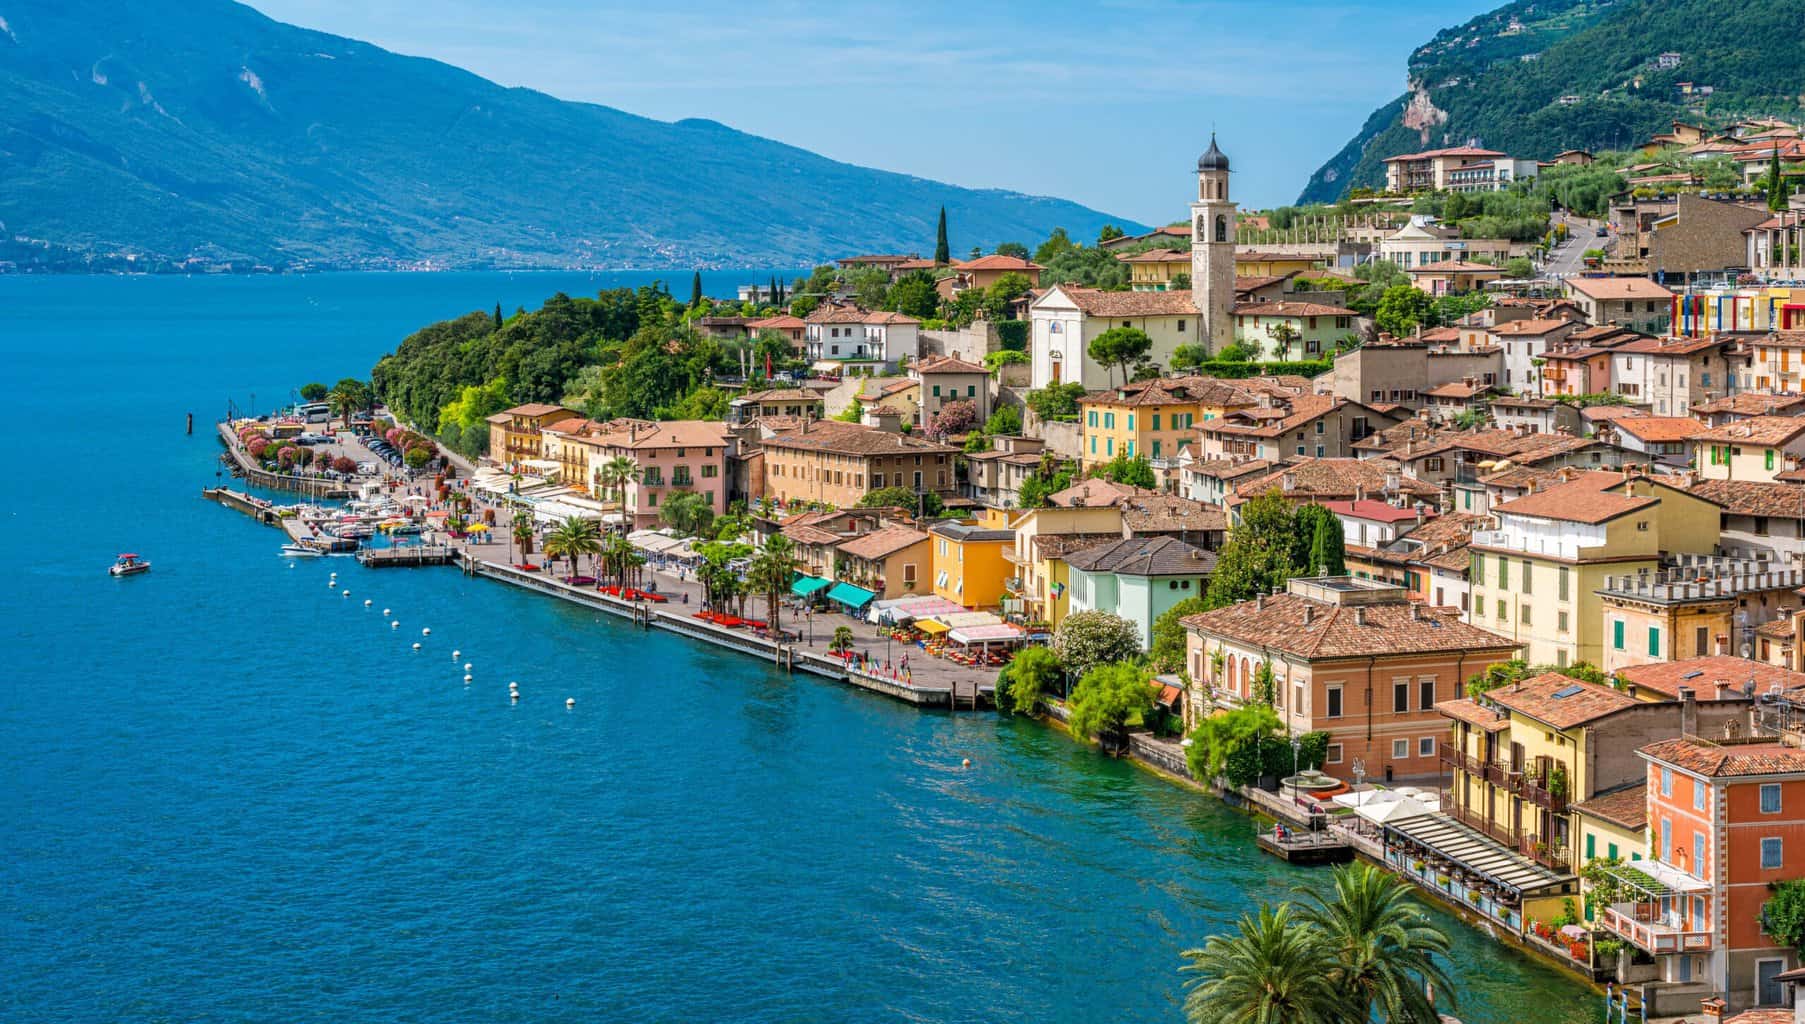 Lake Garda 2 min scaled A lot of people wish they could explore Italy to the fullest, but it’s not always a possibility since some of its activities are quite expensive. However, we’ve found a way for travellers to enjoy the best that Italy has to offer, even if they are on a limited budget, through several fun activities. Here are the top things to do in Italy on a budget. 